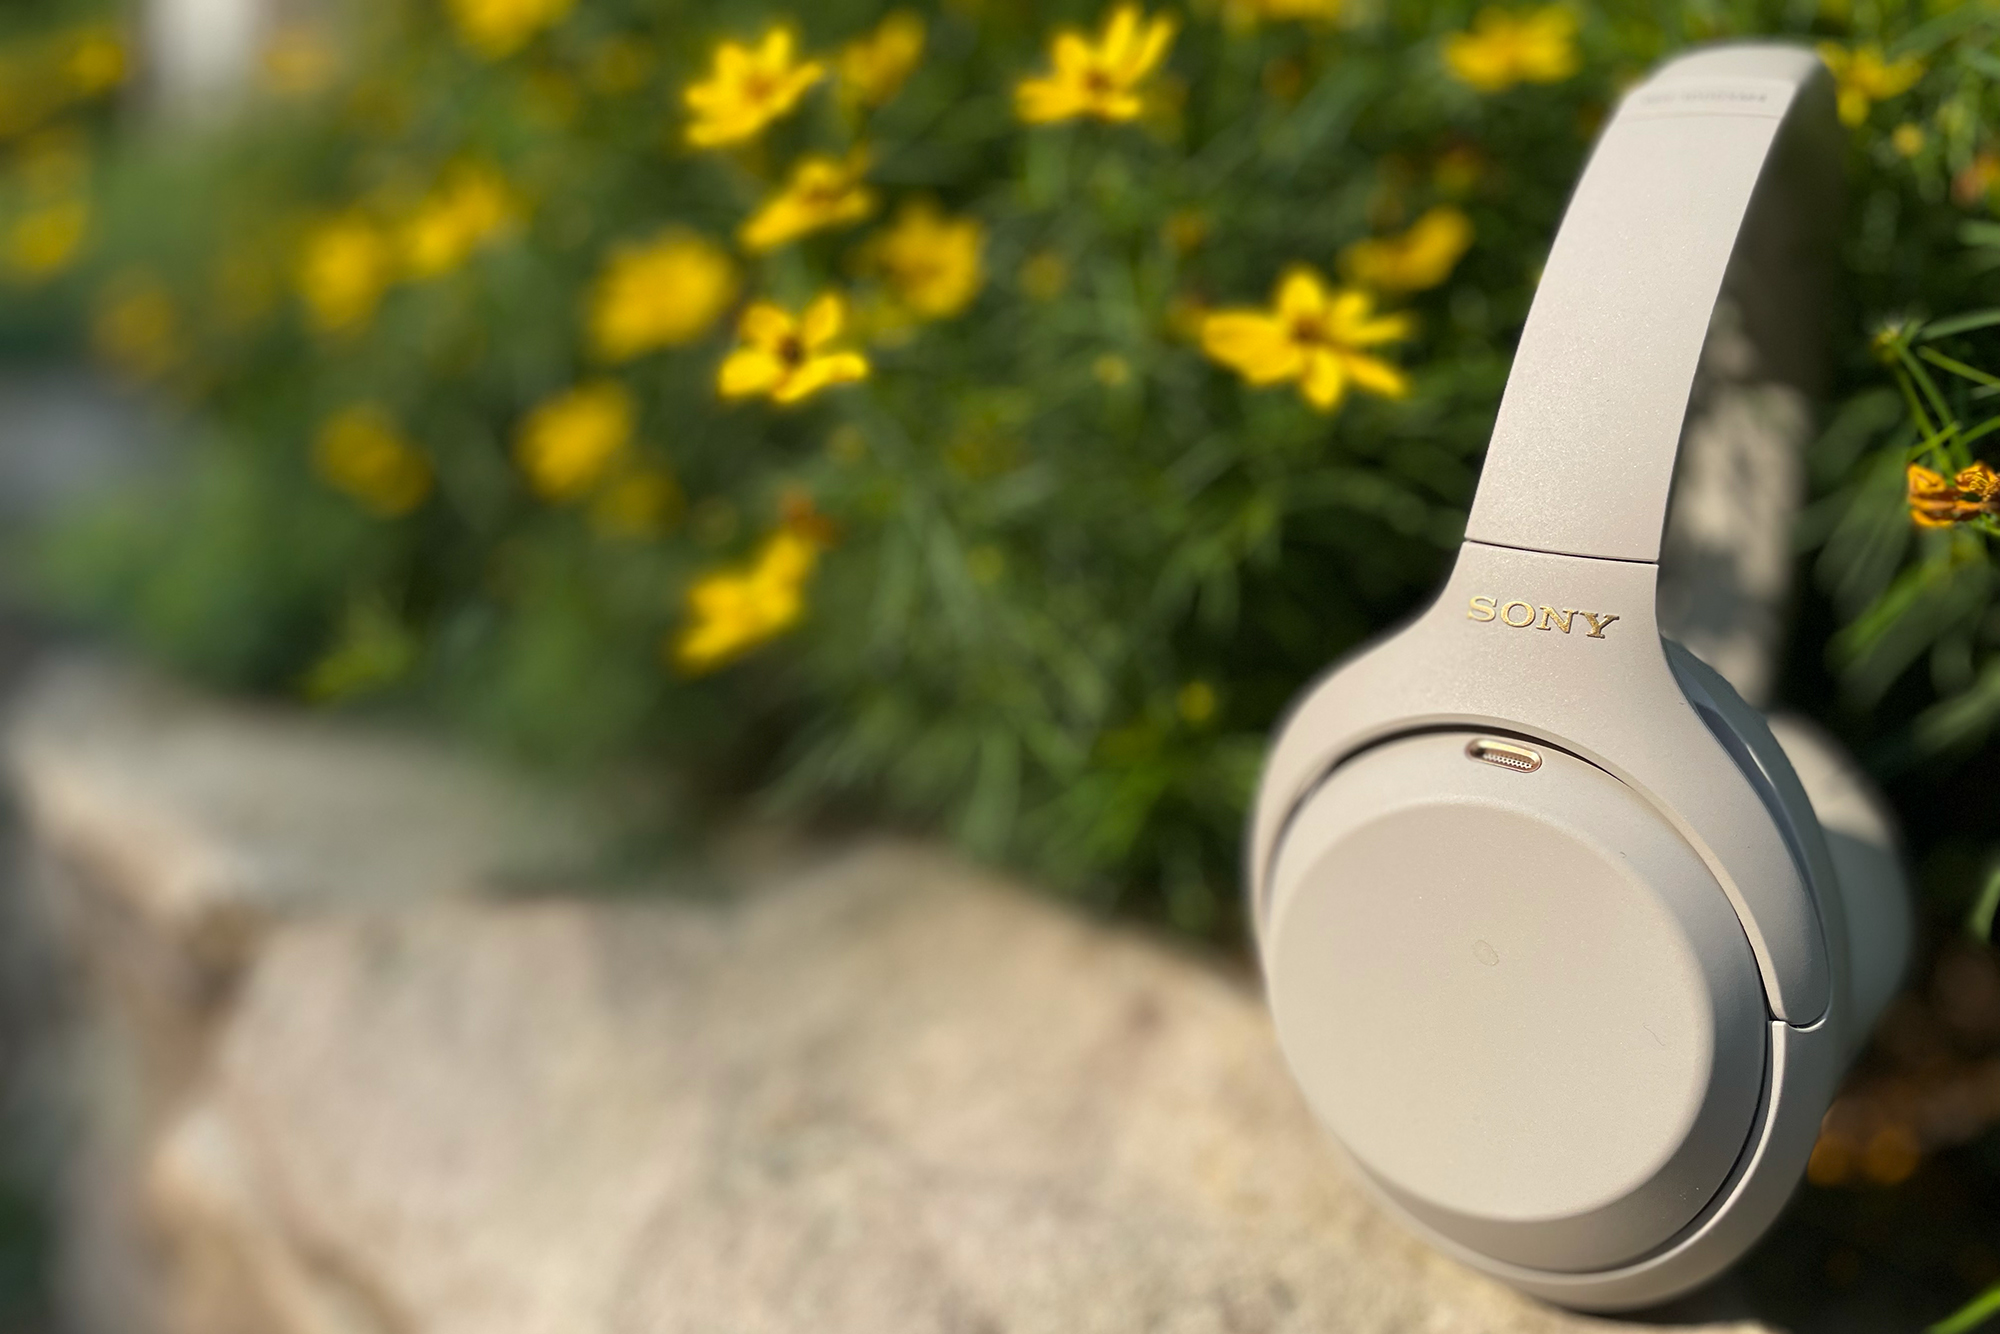 New Sony WH-1000XM4 Headphones Bring Noise-Canceling to New Heights